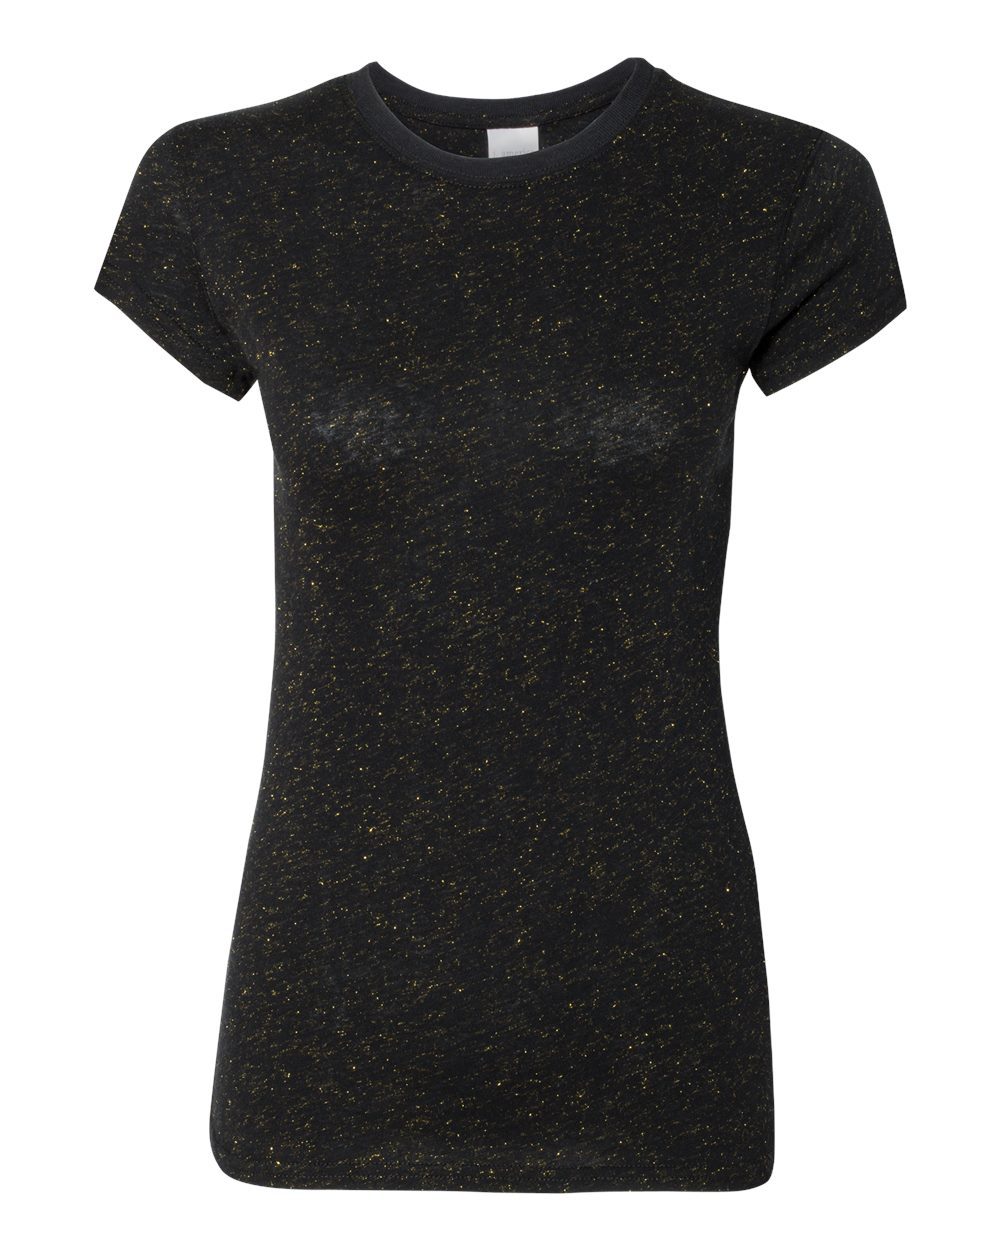 J. America Womens Glitter T-Shirt 8138 [from $12.71] | Hosiery and More